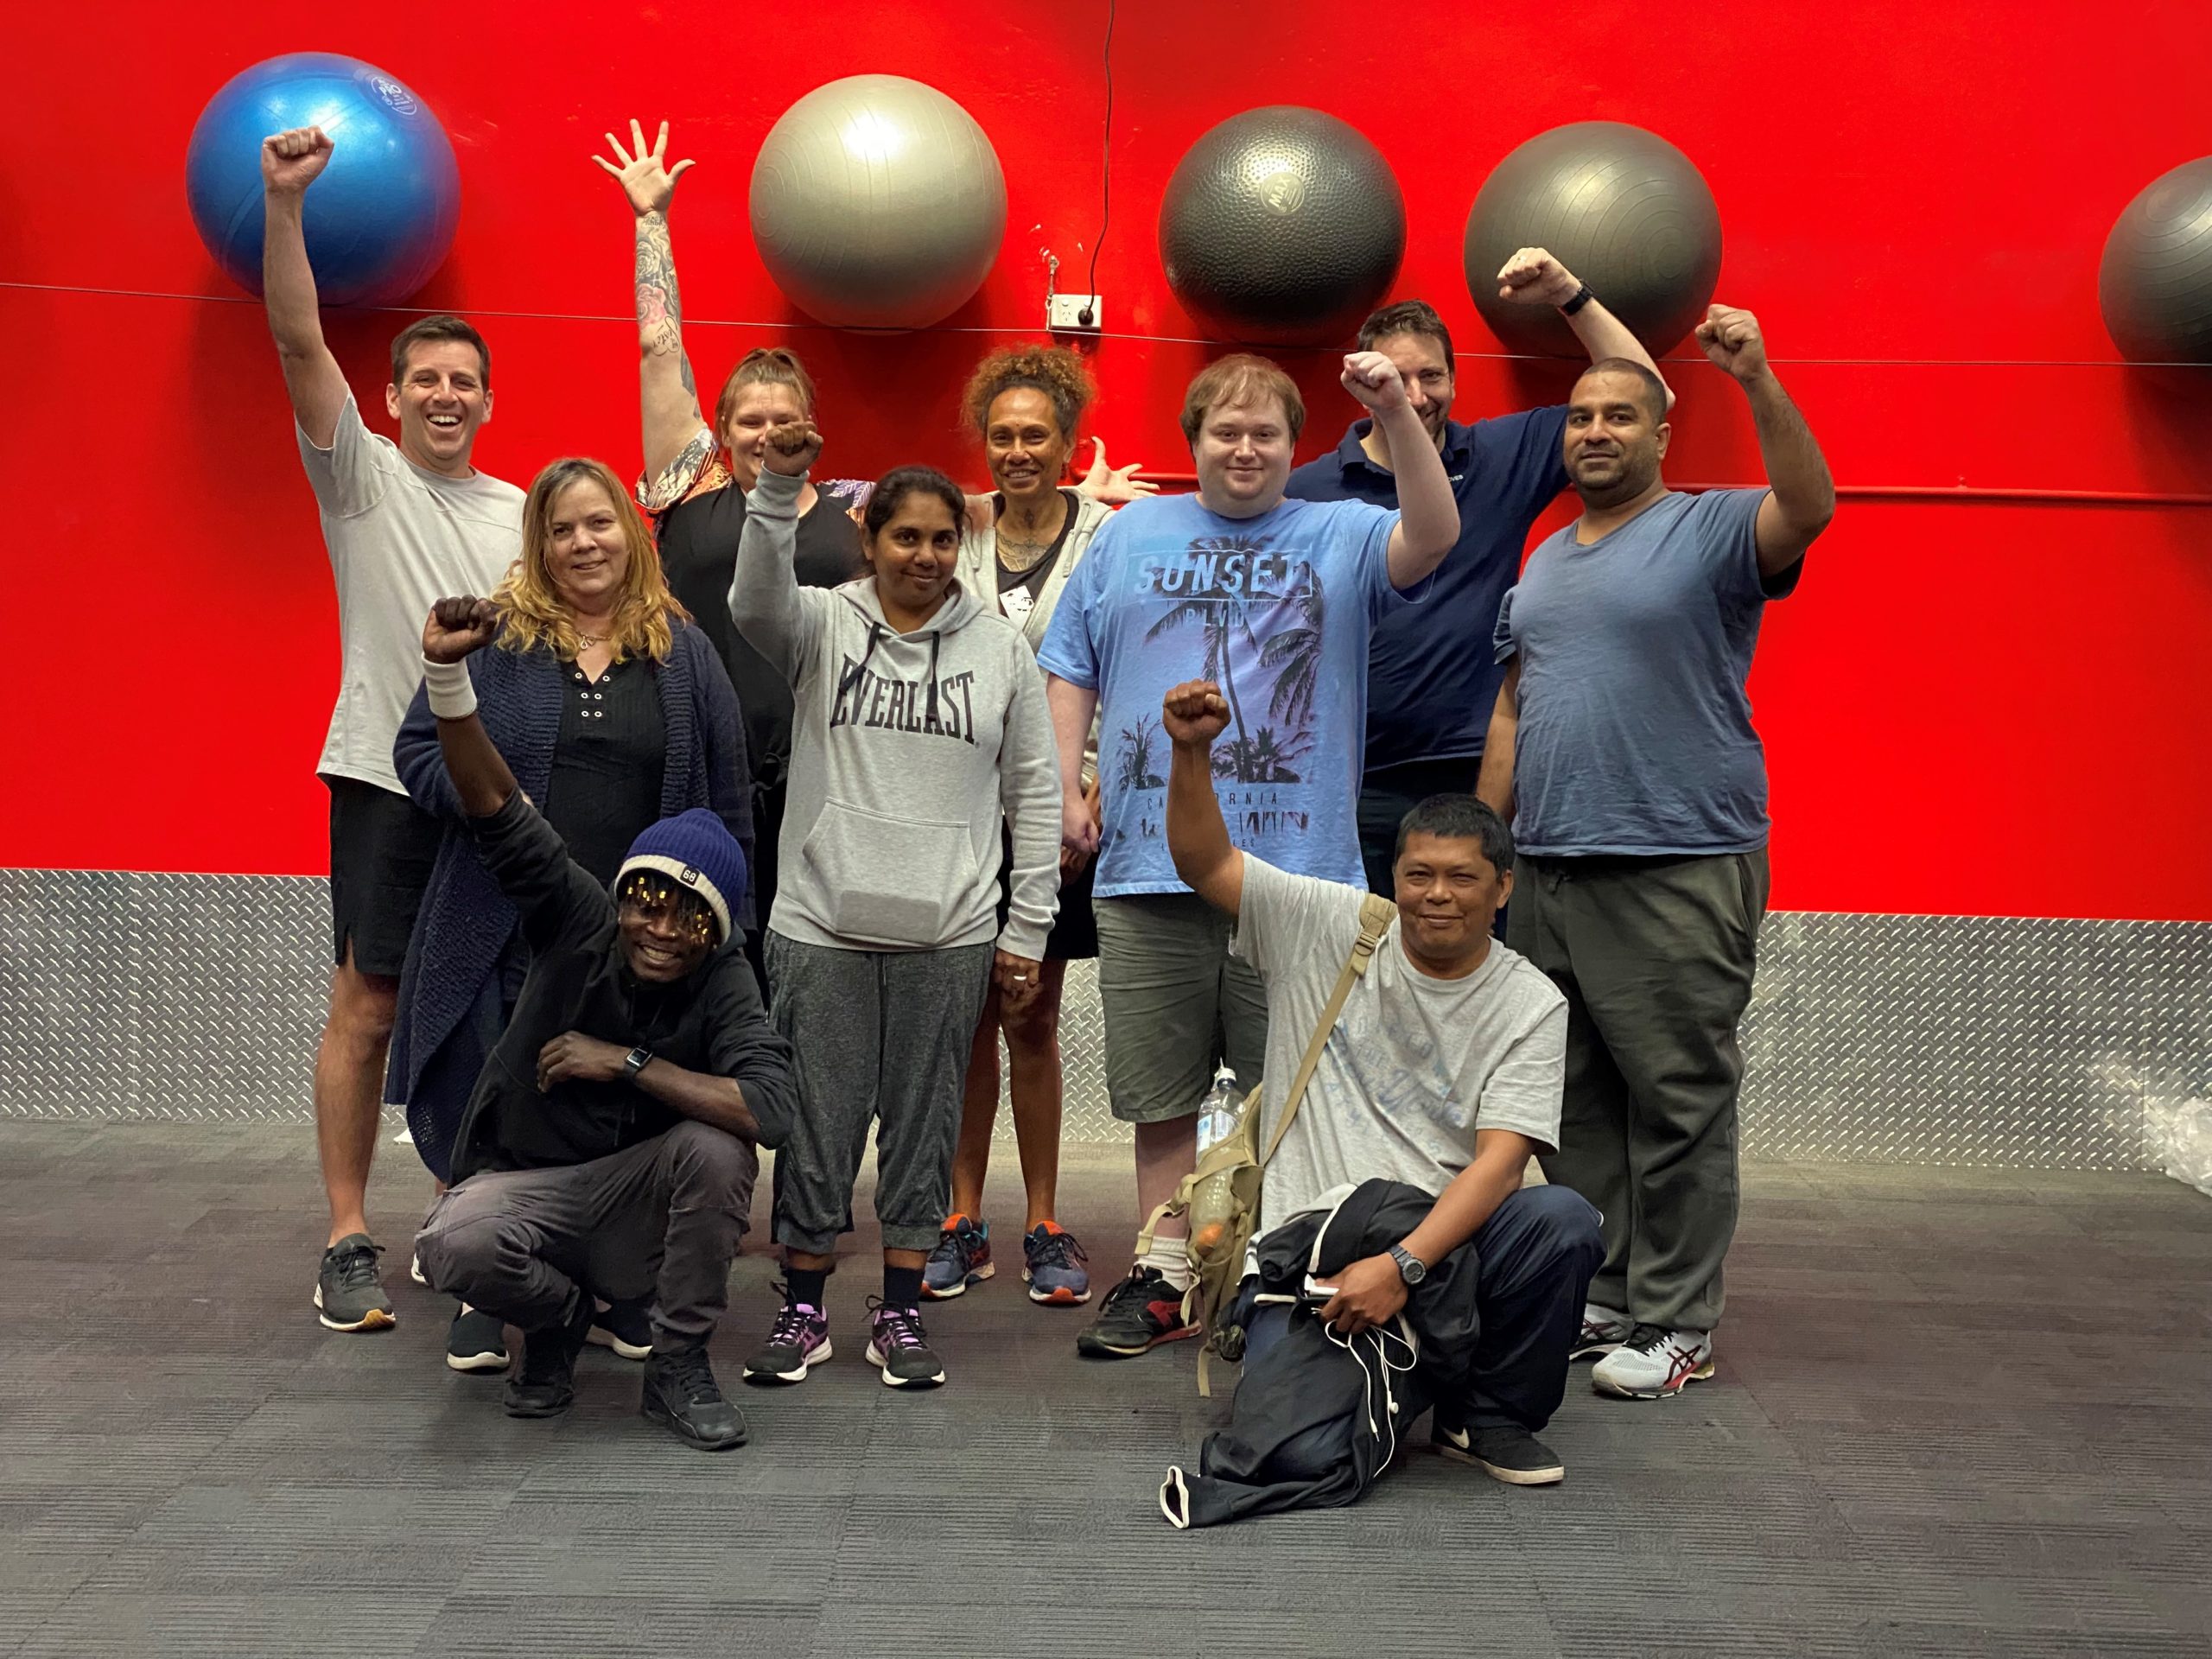 uLaunch - photo of group of happy people in a gym